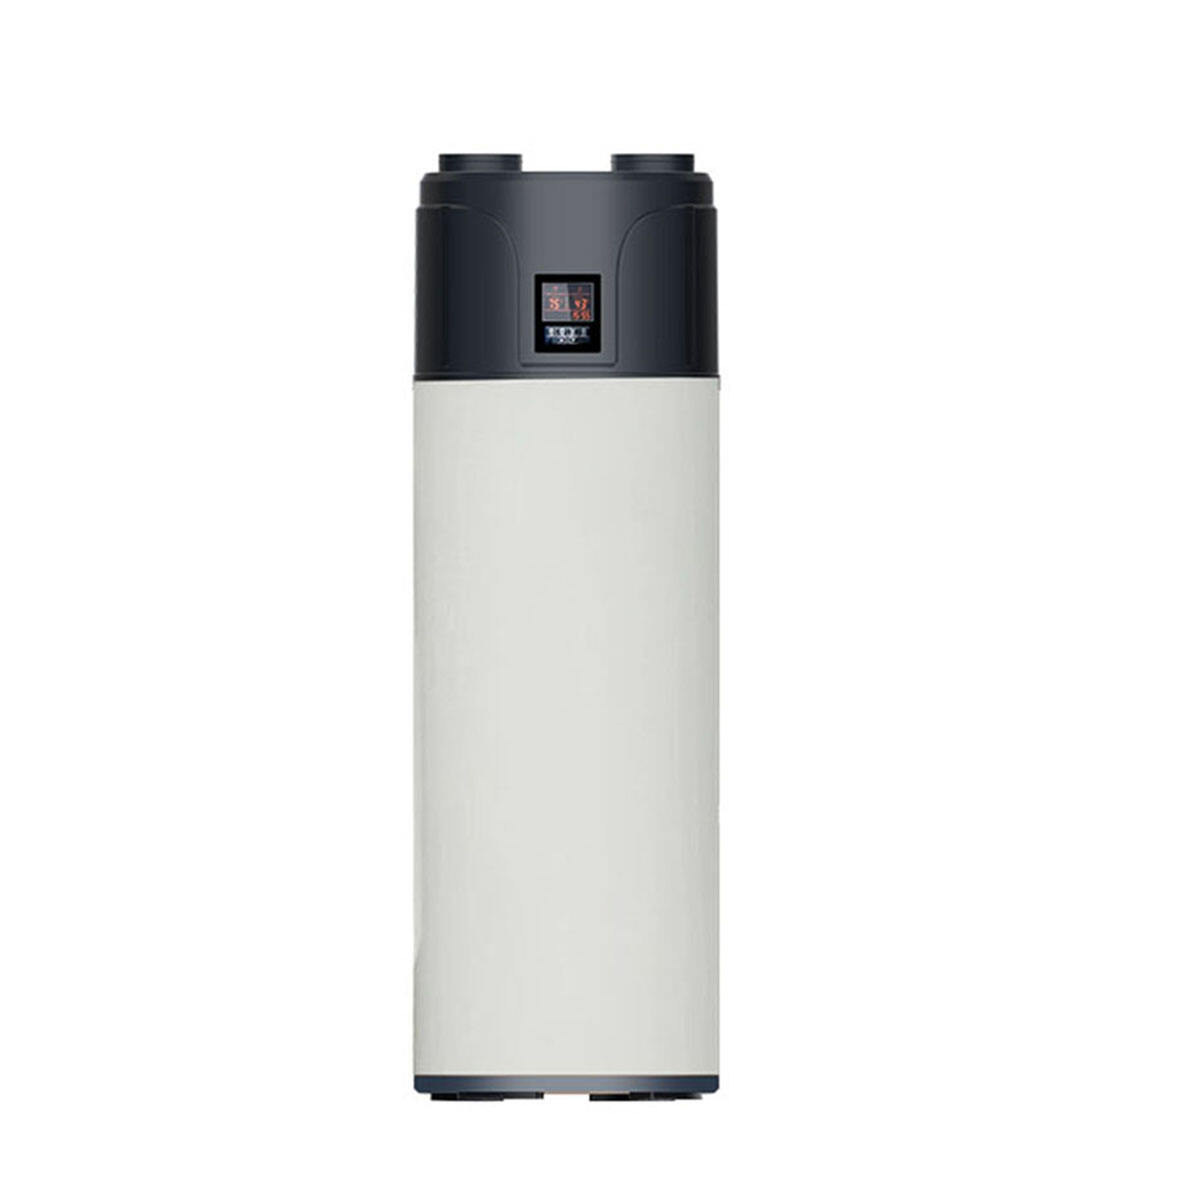 R290 domestic All in one hot water heat pump air source supplier